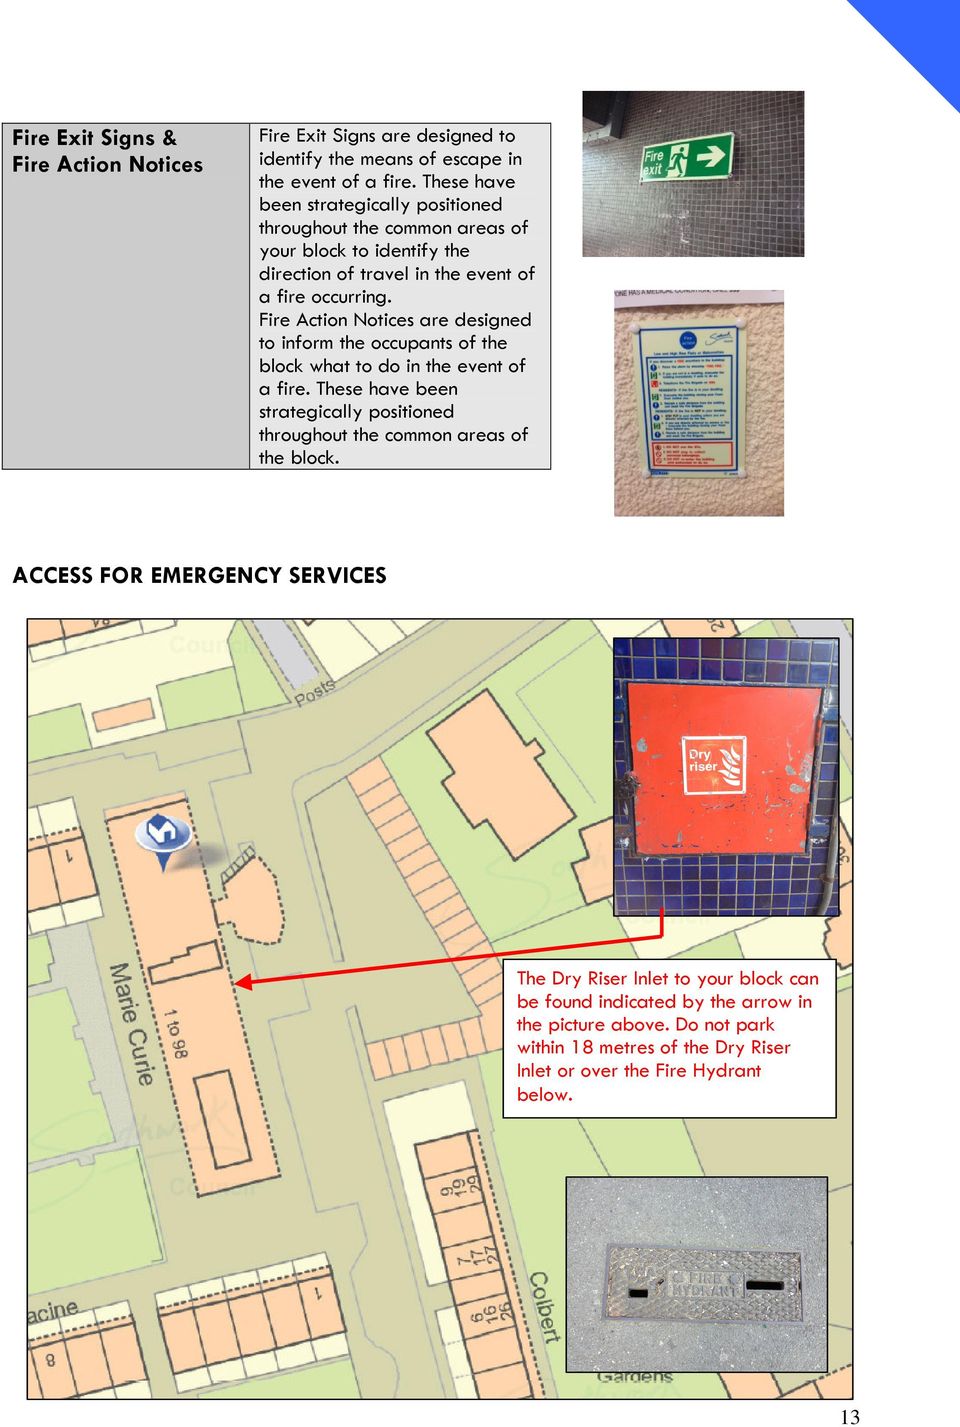 Fire Action Notices are designed to inform the occupants of the block what to do in the event of a fire.